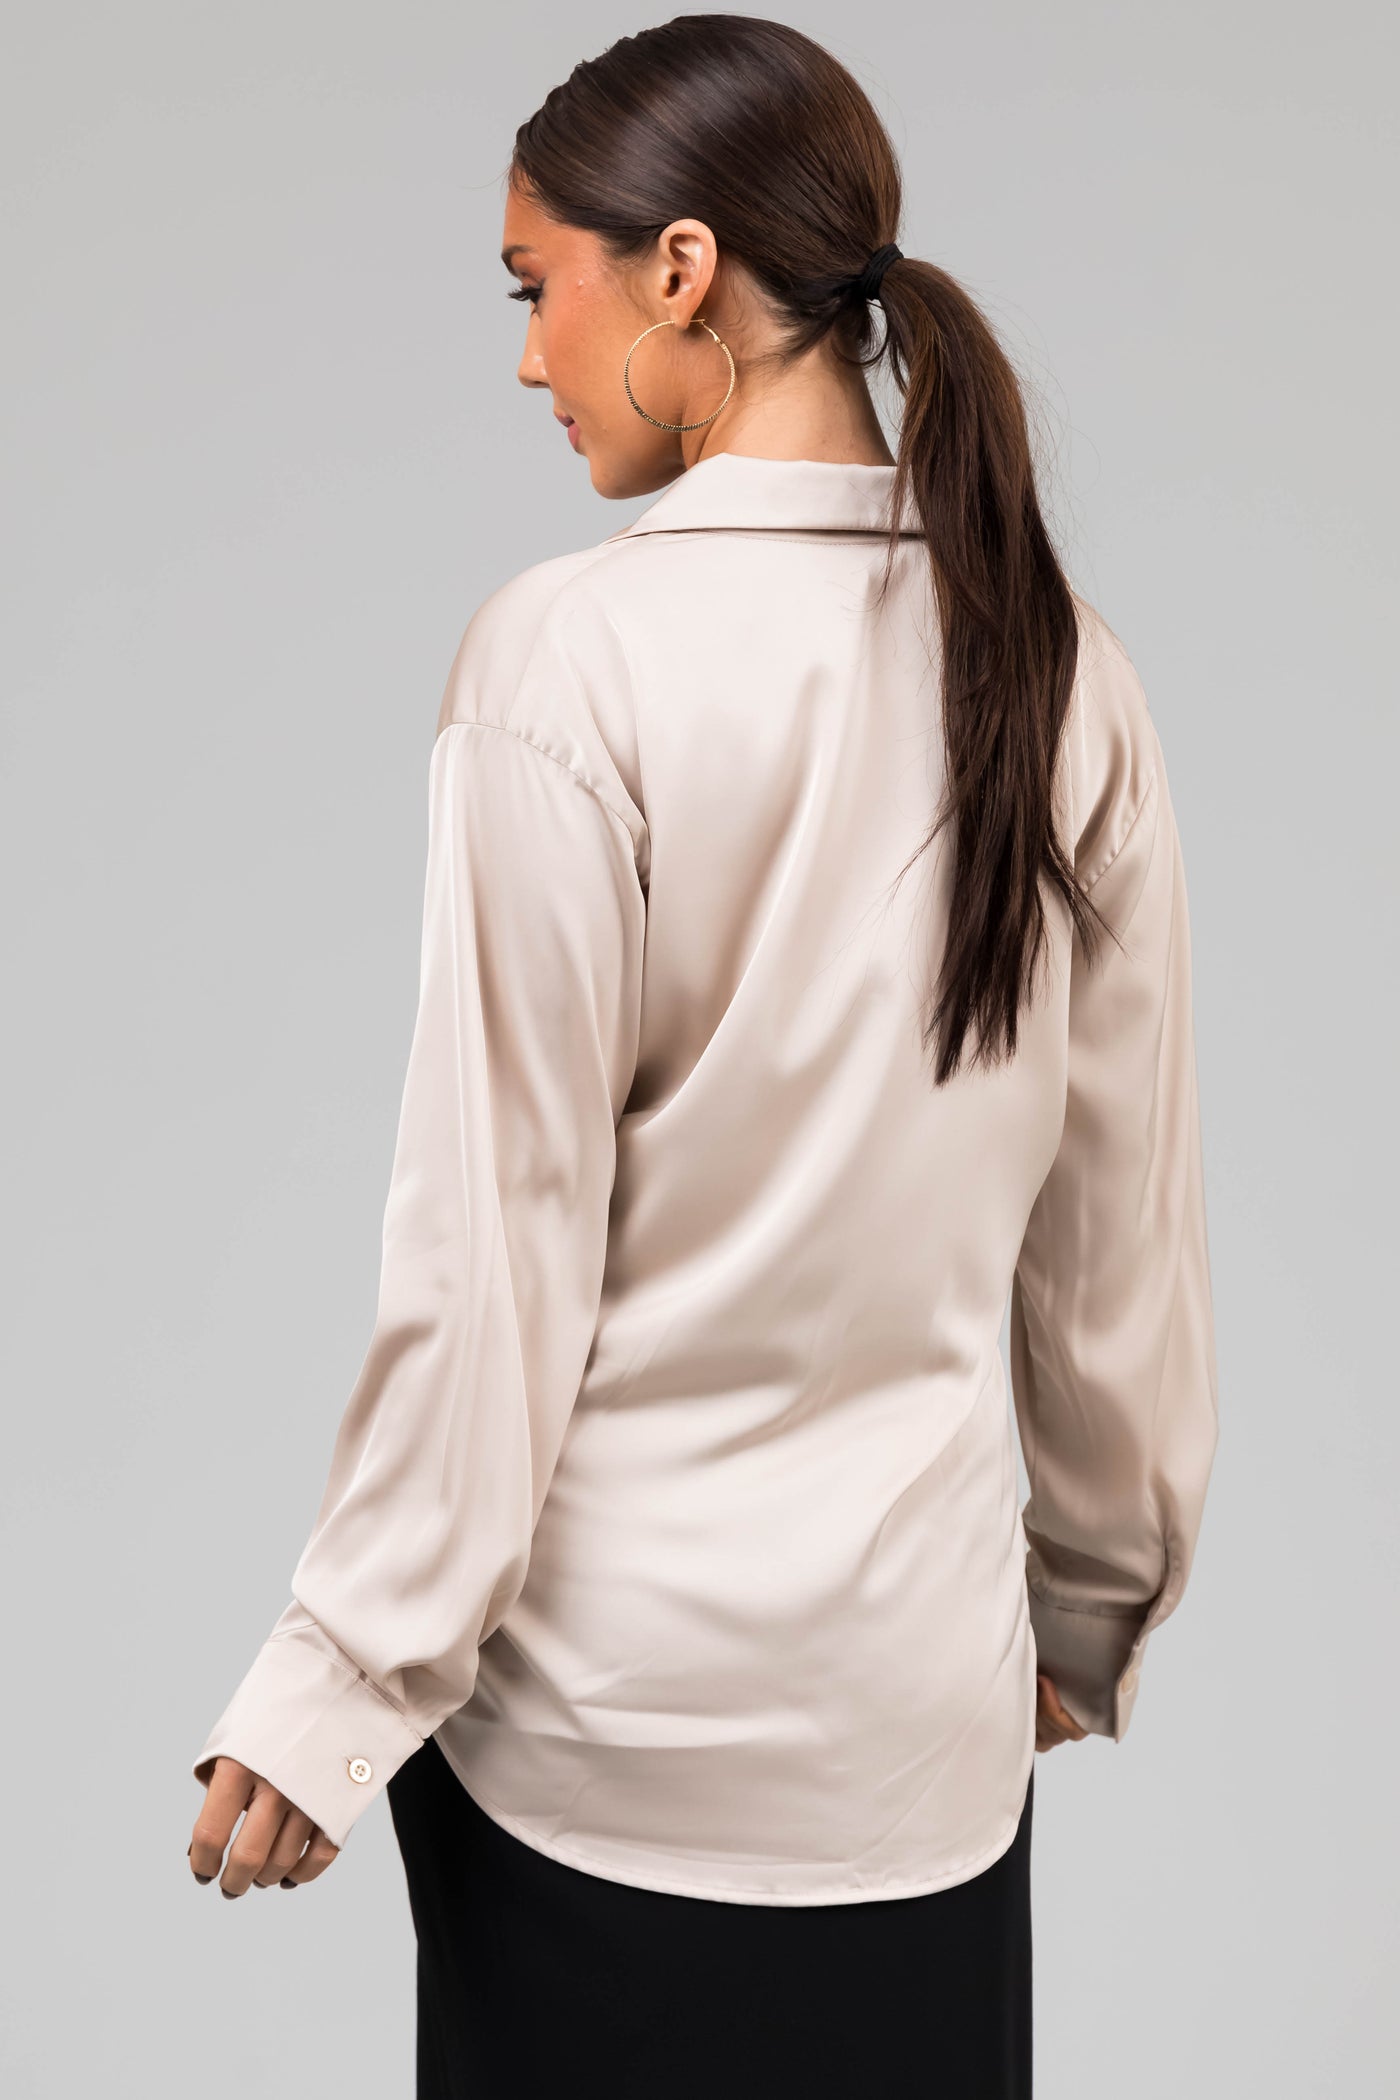 Champagne Satin Button Front Collared Shirt